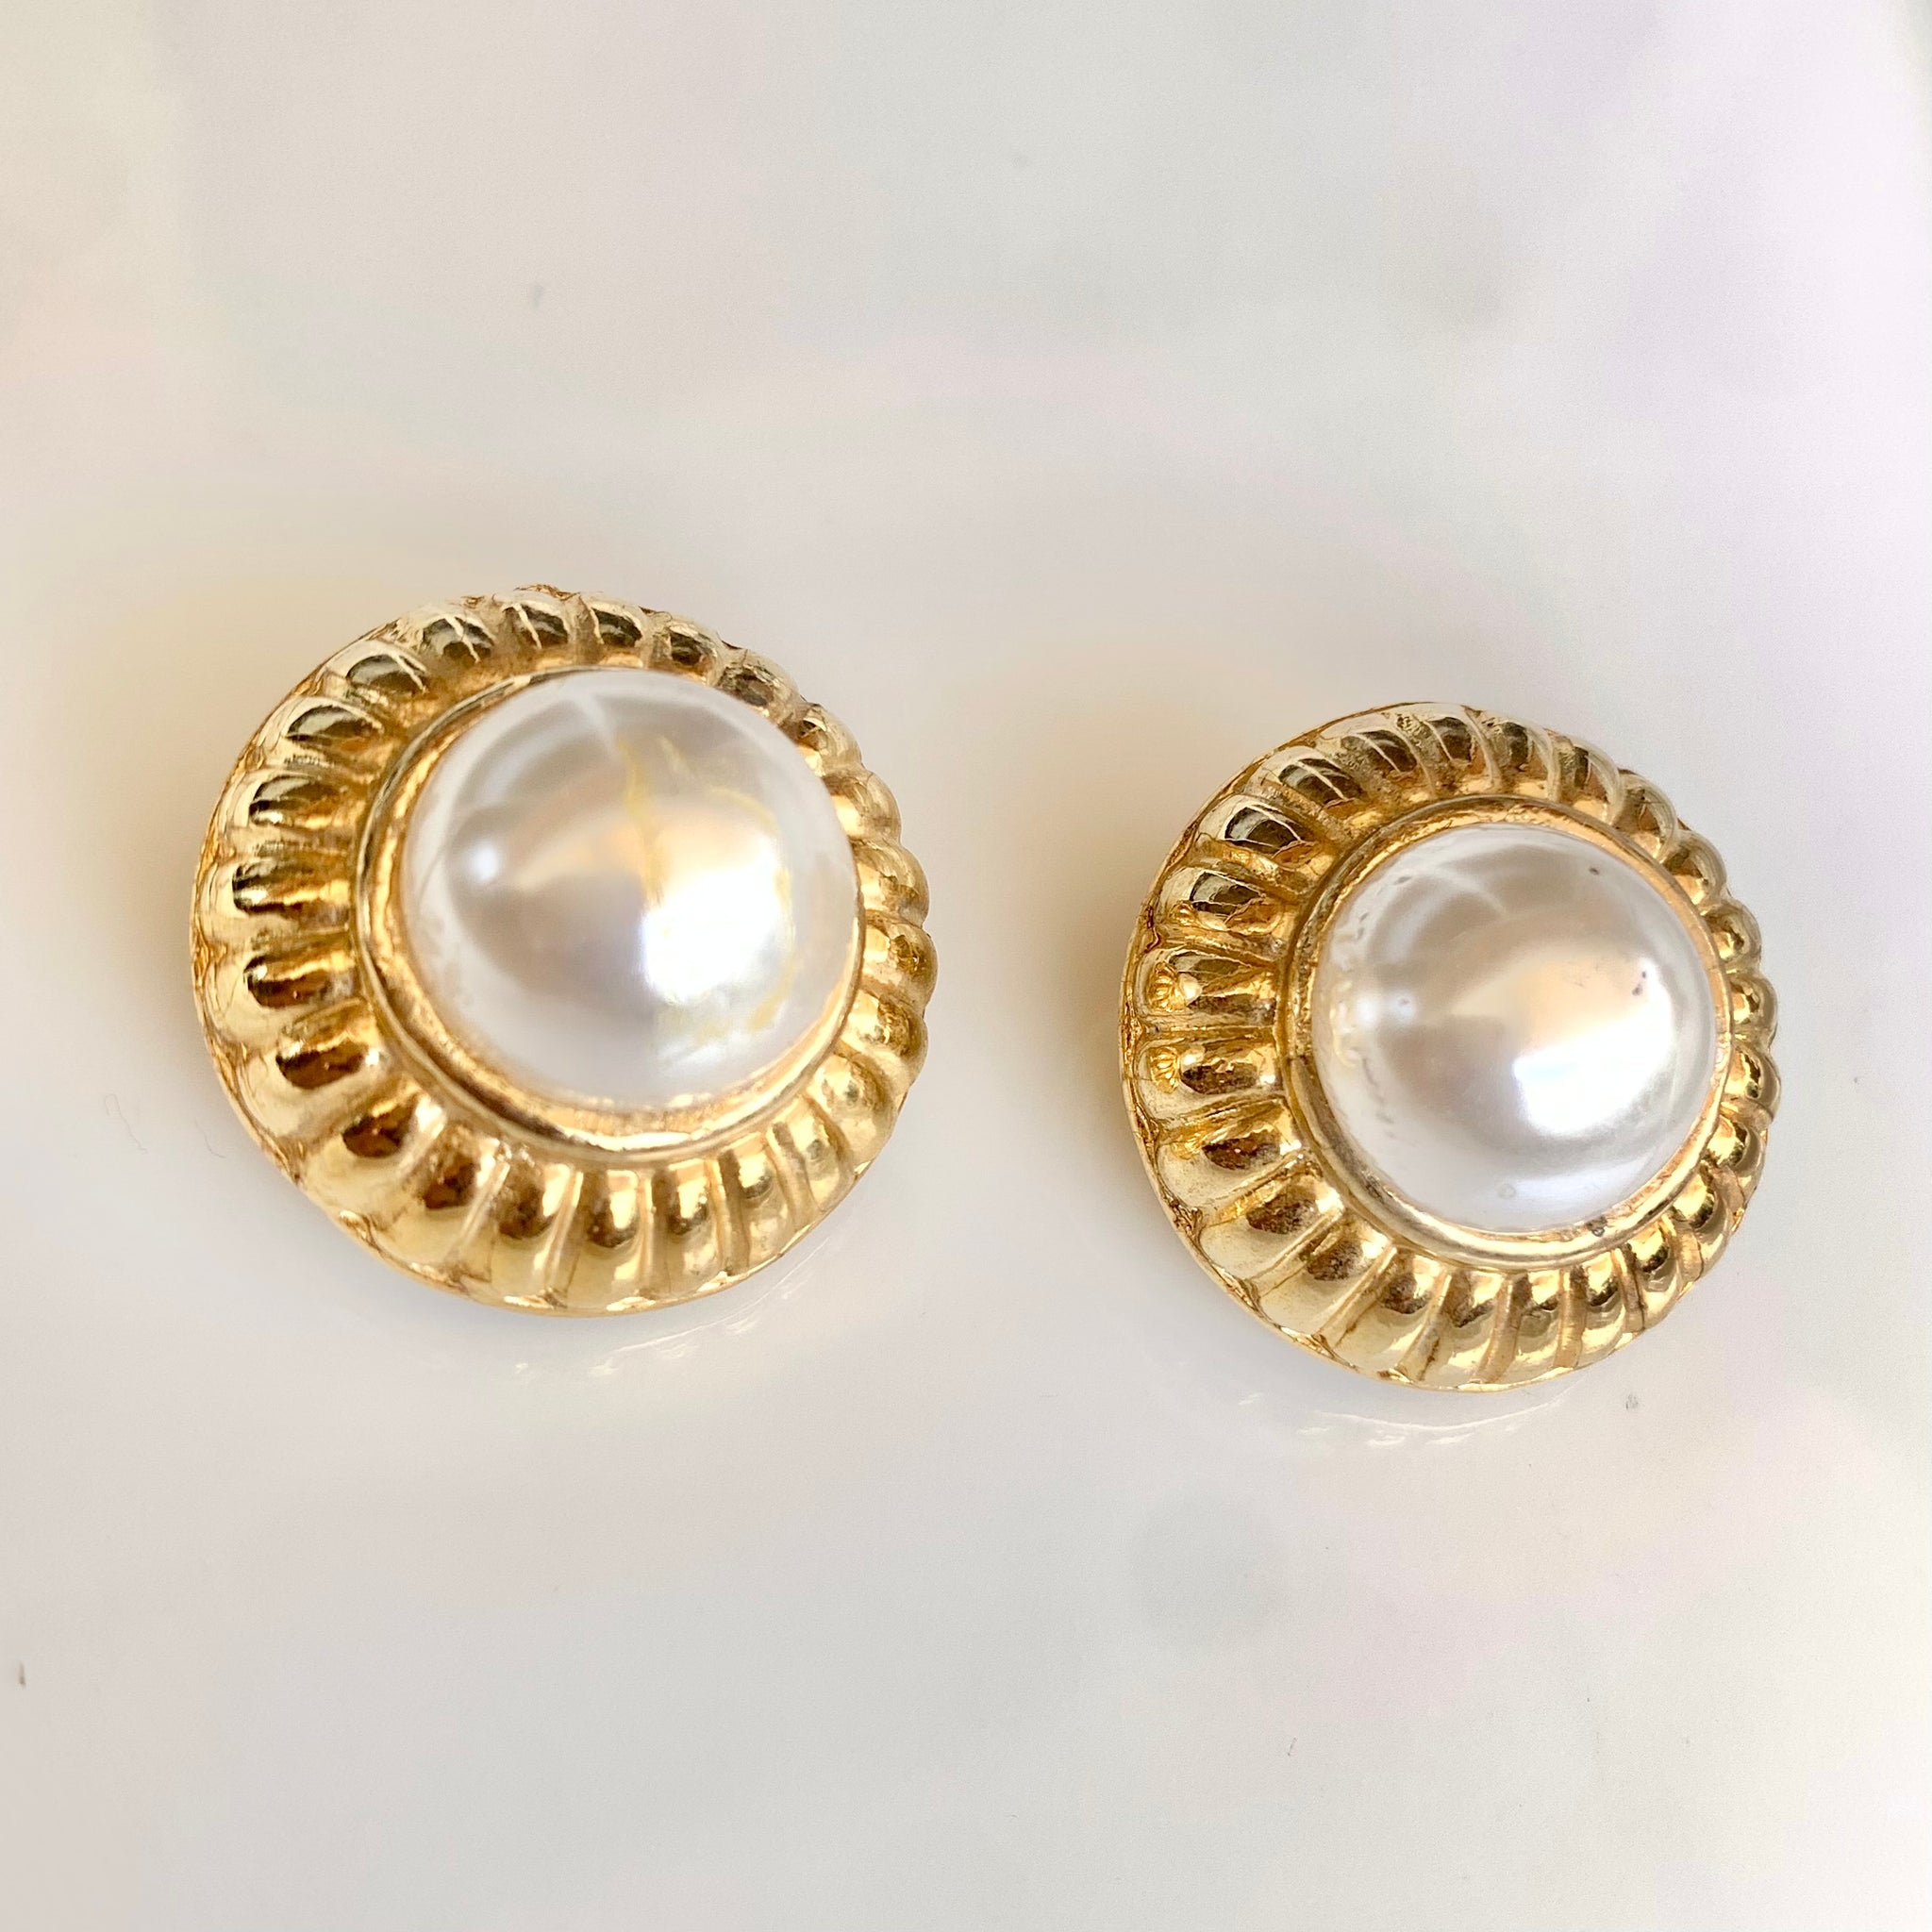 Brass High Quality Cubic Zirconia Stud Earrings at Rs 500/pair in Mumbai